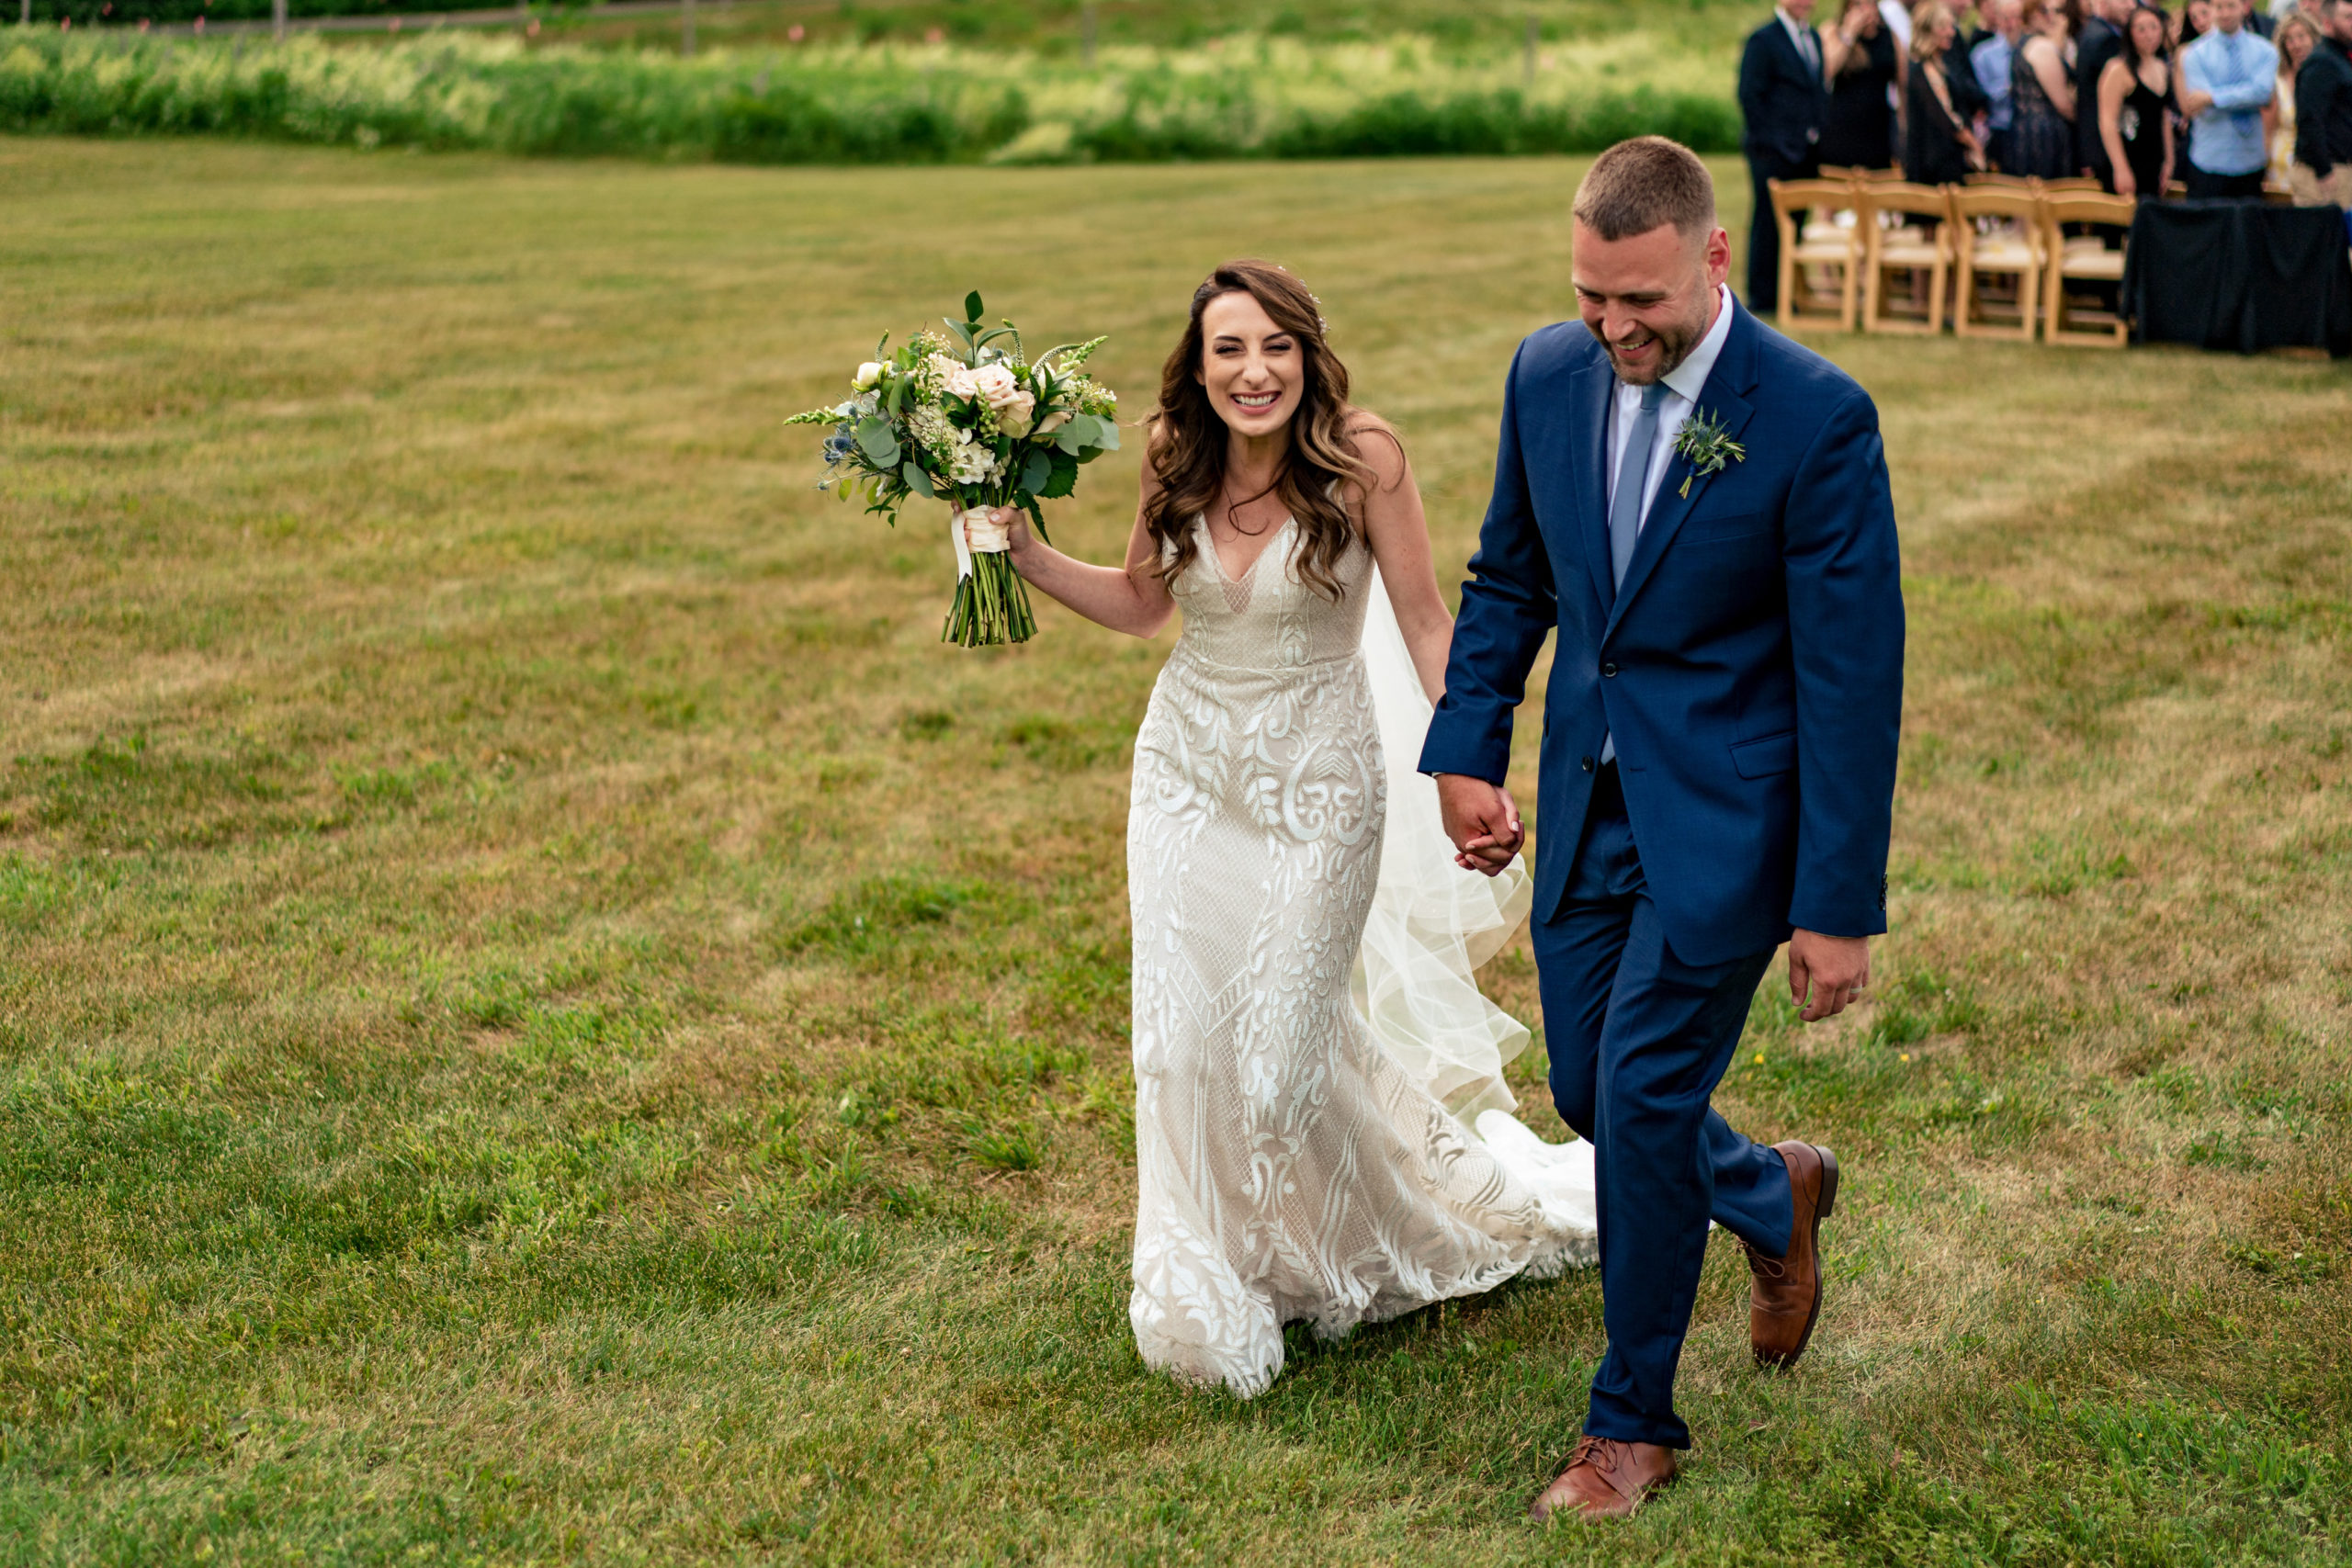 bride and groom exiting ceremony. Bride in lace dress and white flowers in bridal bouquet, groom in blue suit and brown shoes